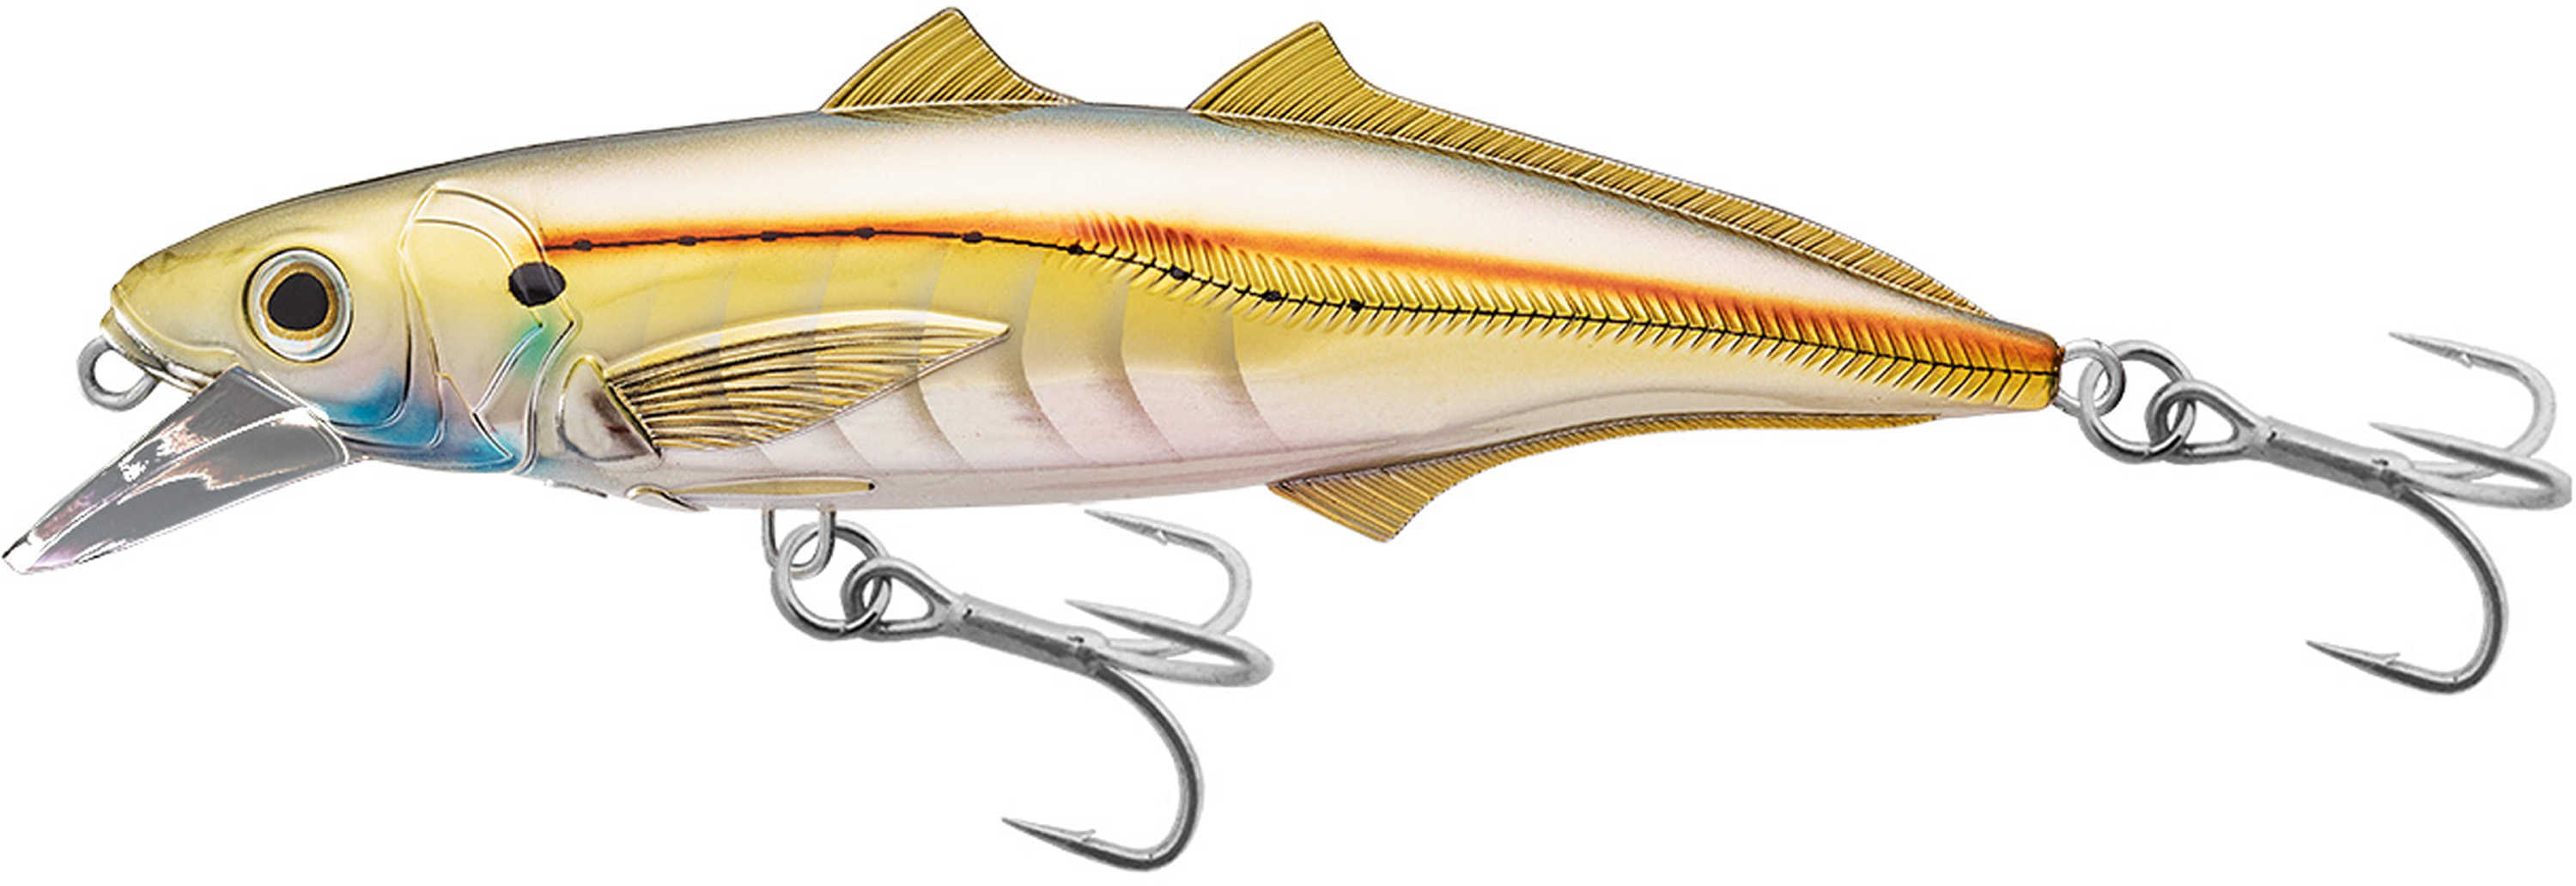 LIVETARGET Lures / Koppers Fishing and Tackle Corp Cigar Minow Jerkbait 4 1/2" Number 1/0 Hook Size 2-4 Depth Pearl/Gold Md: CMJ1